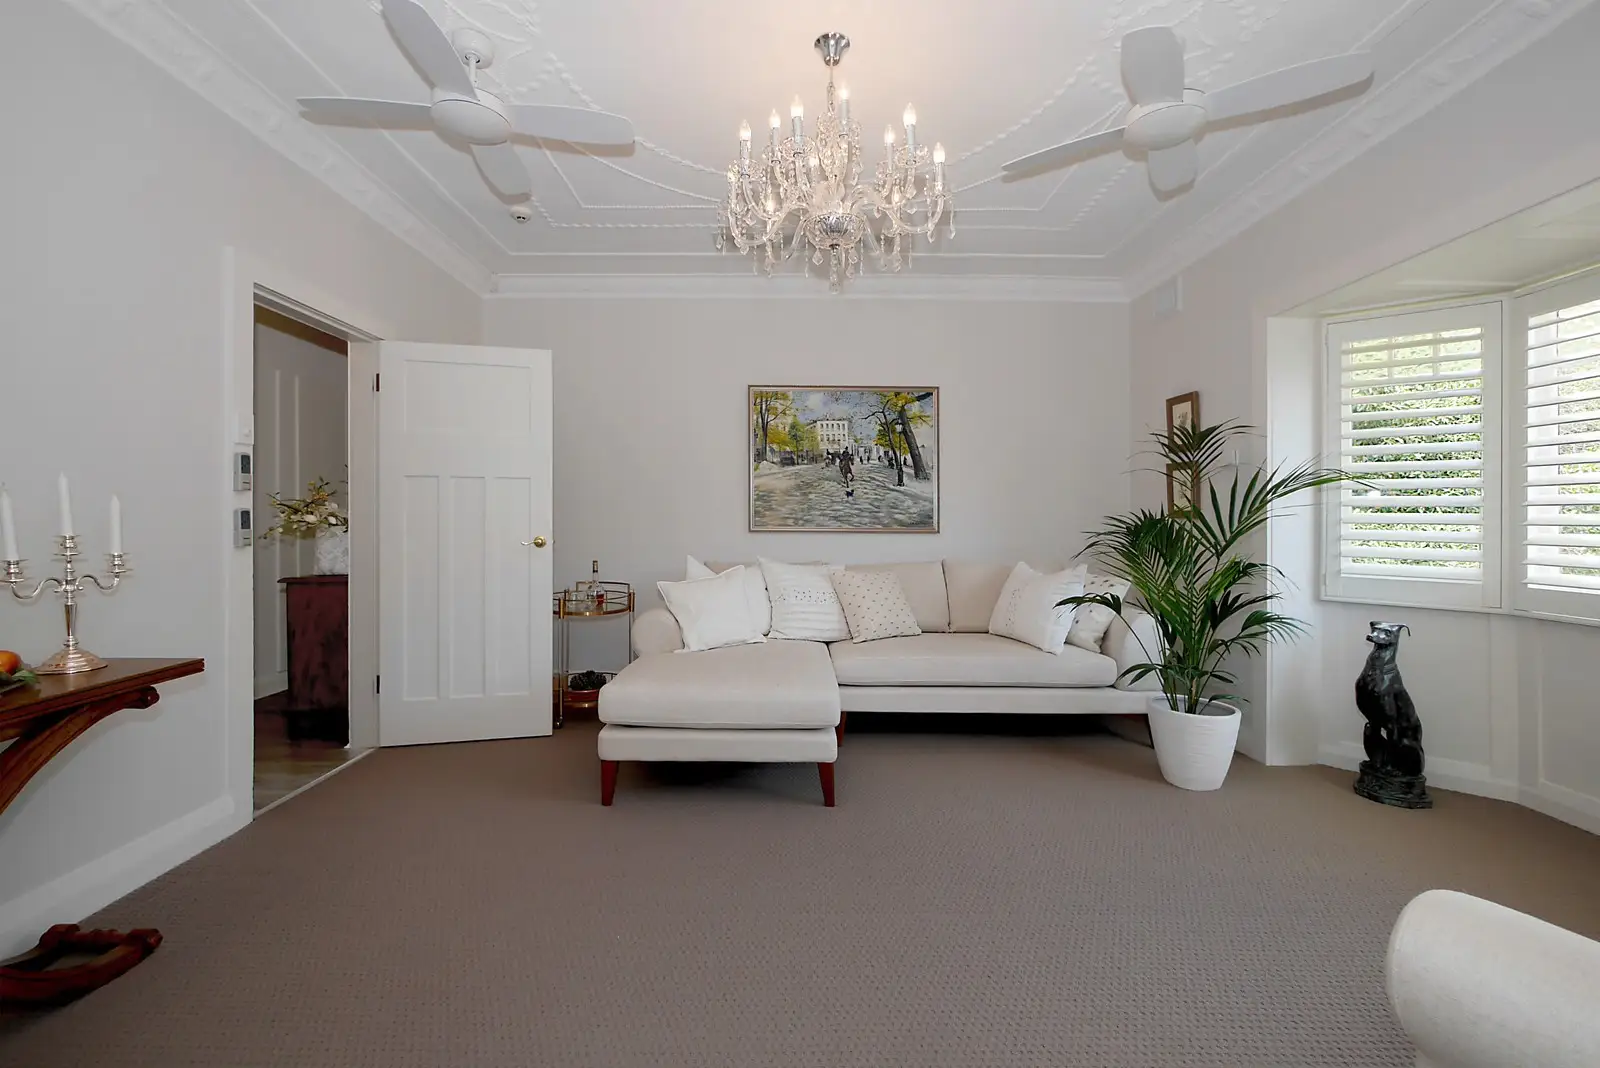 Photo #2: 6/106 Balfour Road, Bellevue Hill - Sold by Sydney Sotheby's International Realty